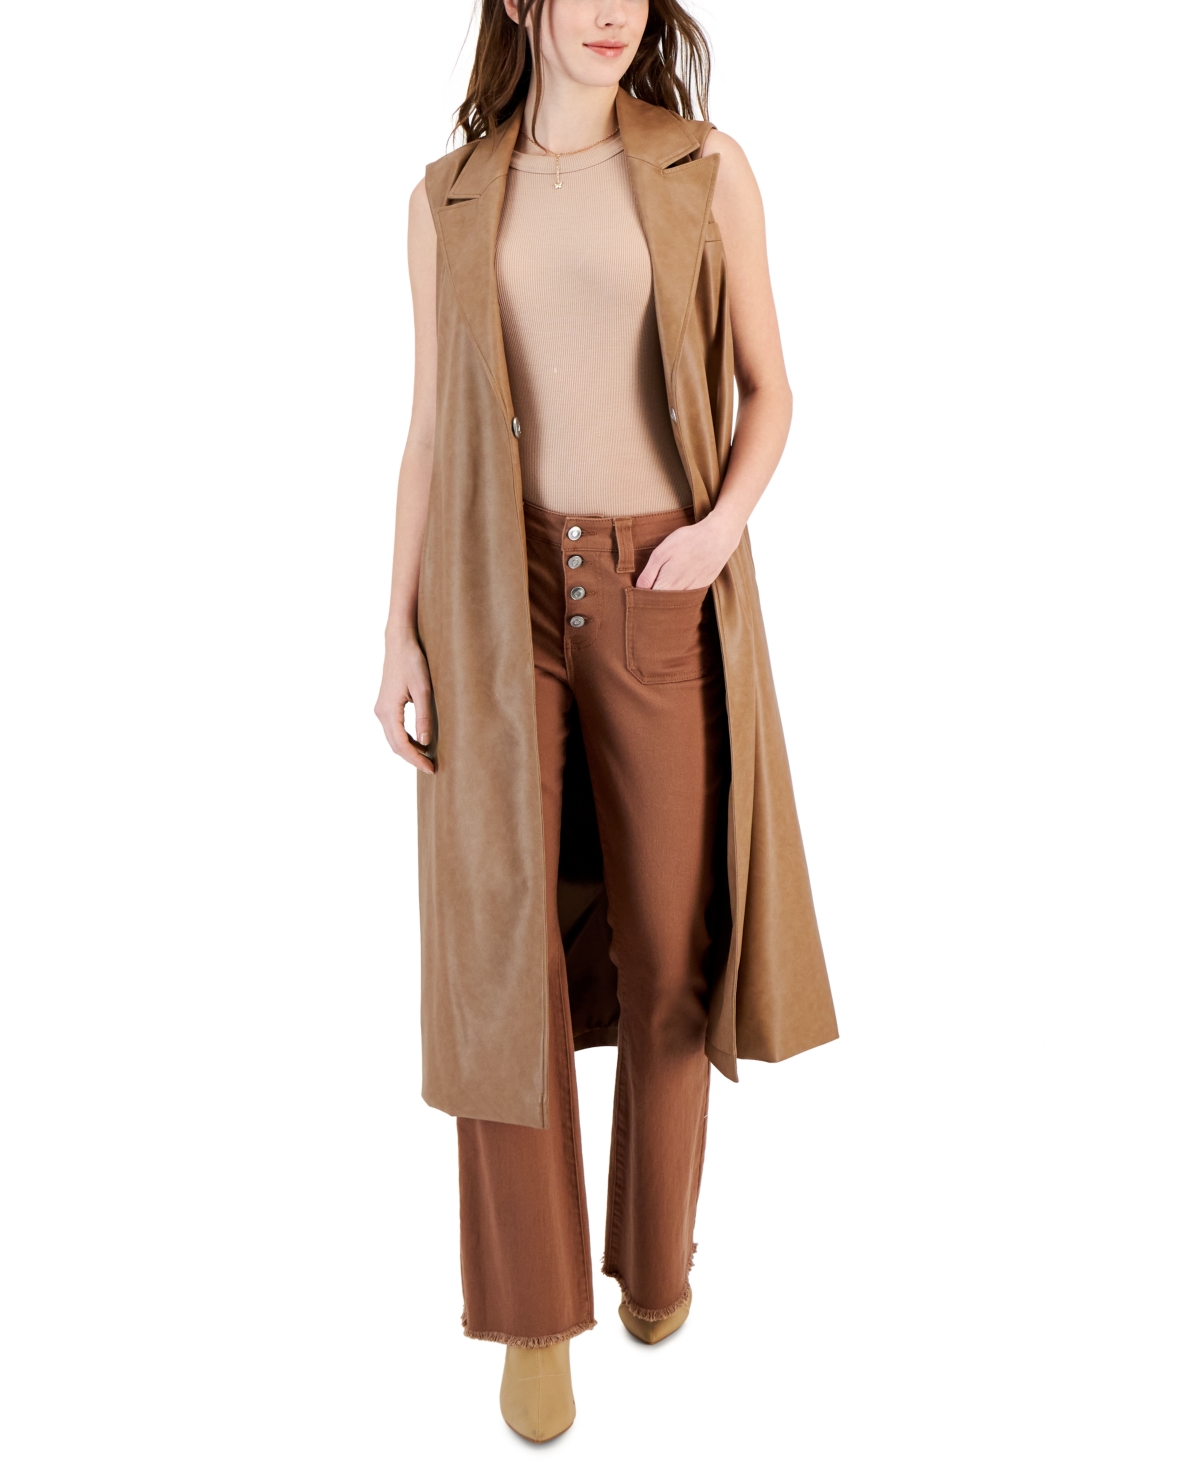 Women's Faux Leather Sleeveless Midi Trench Coat - Fawn